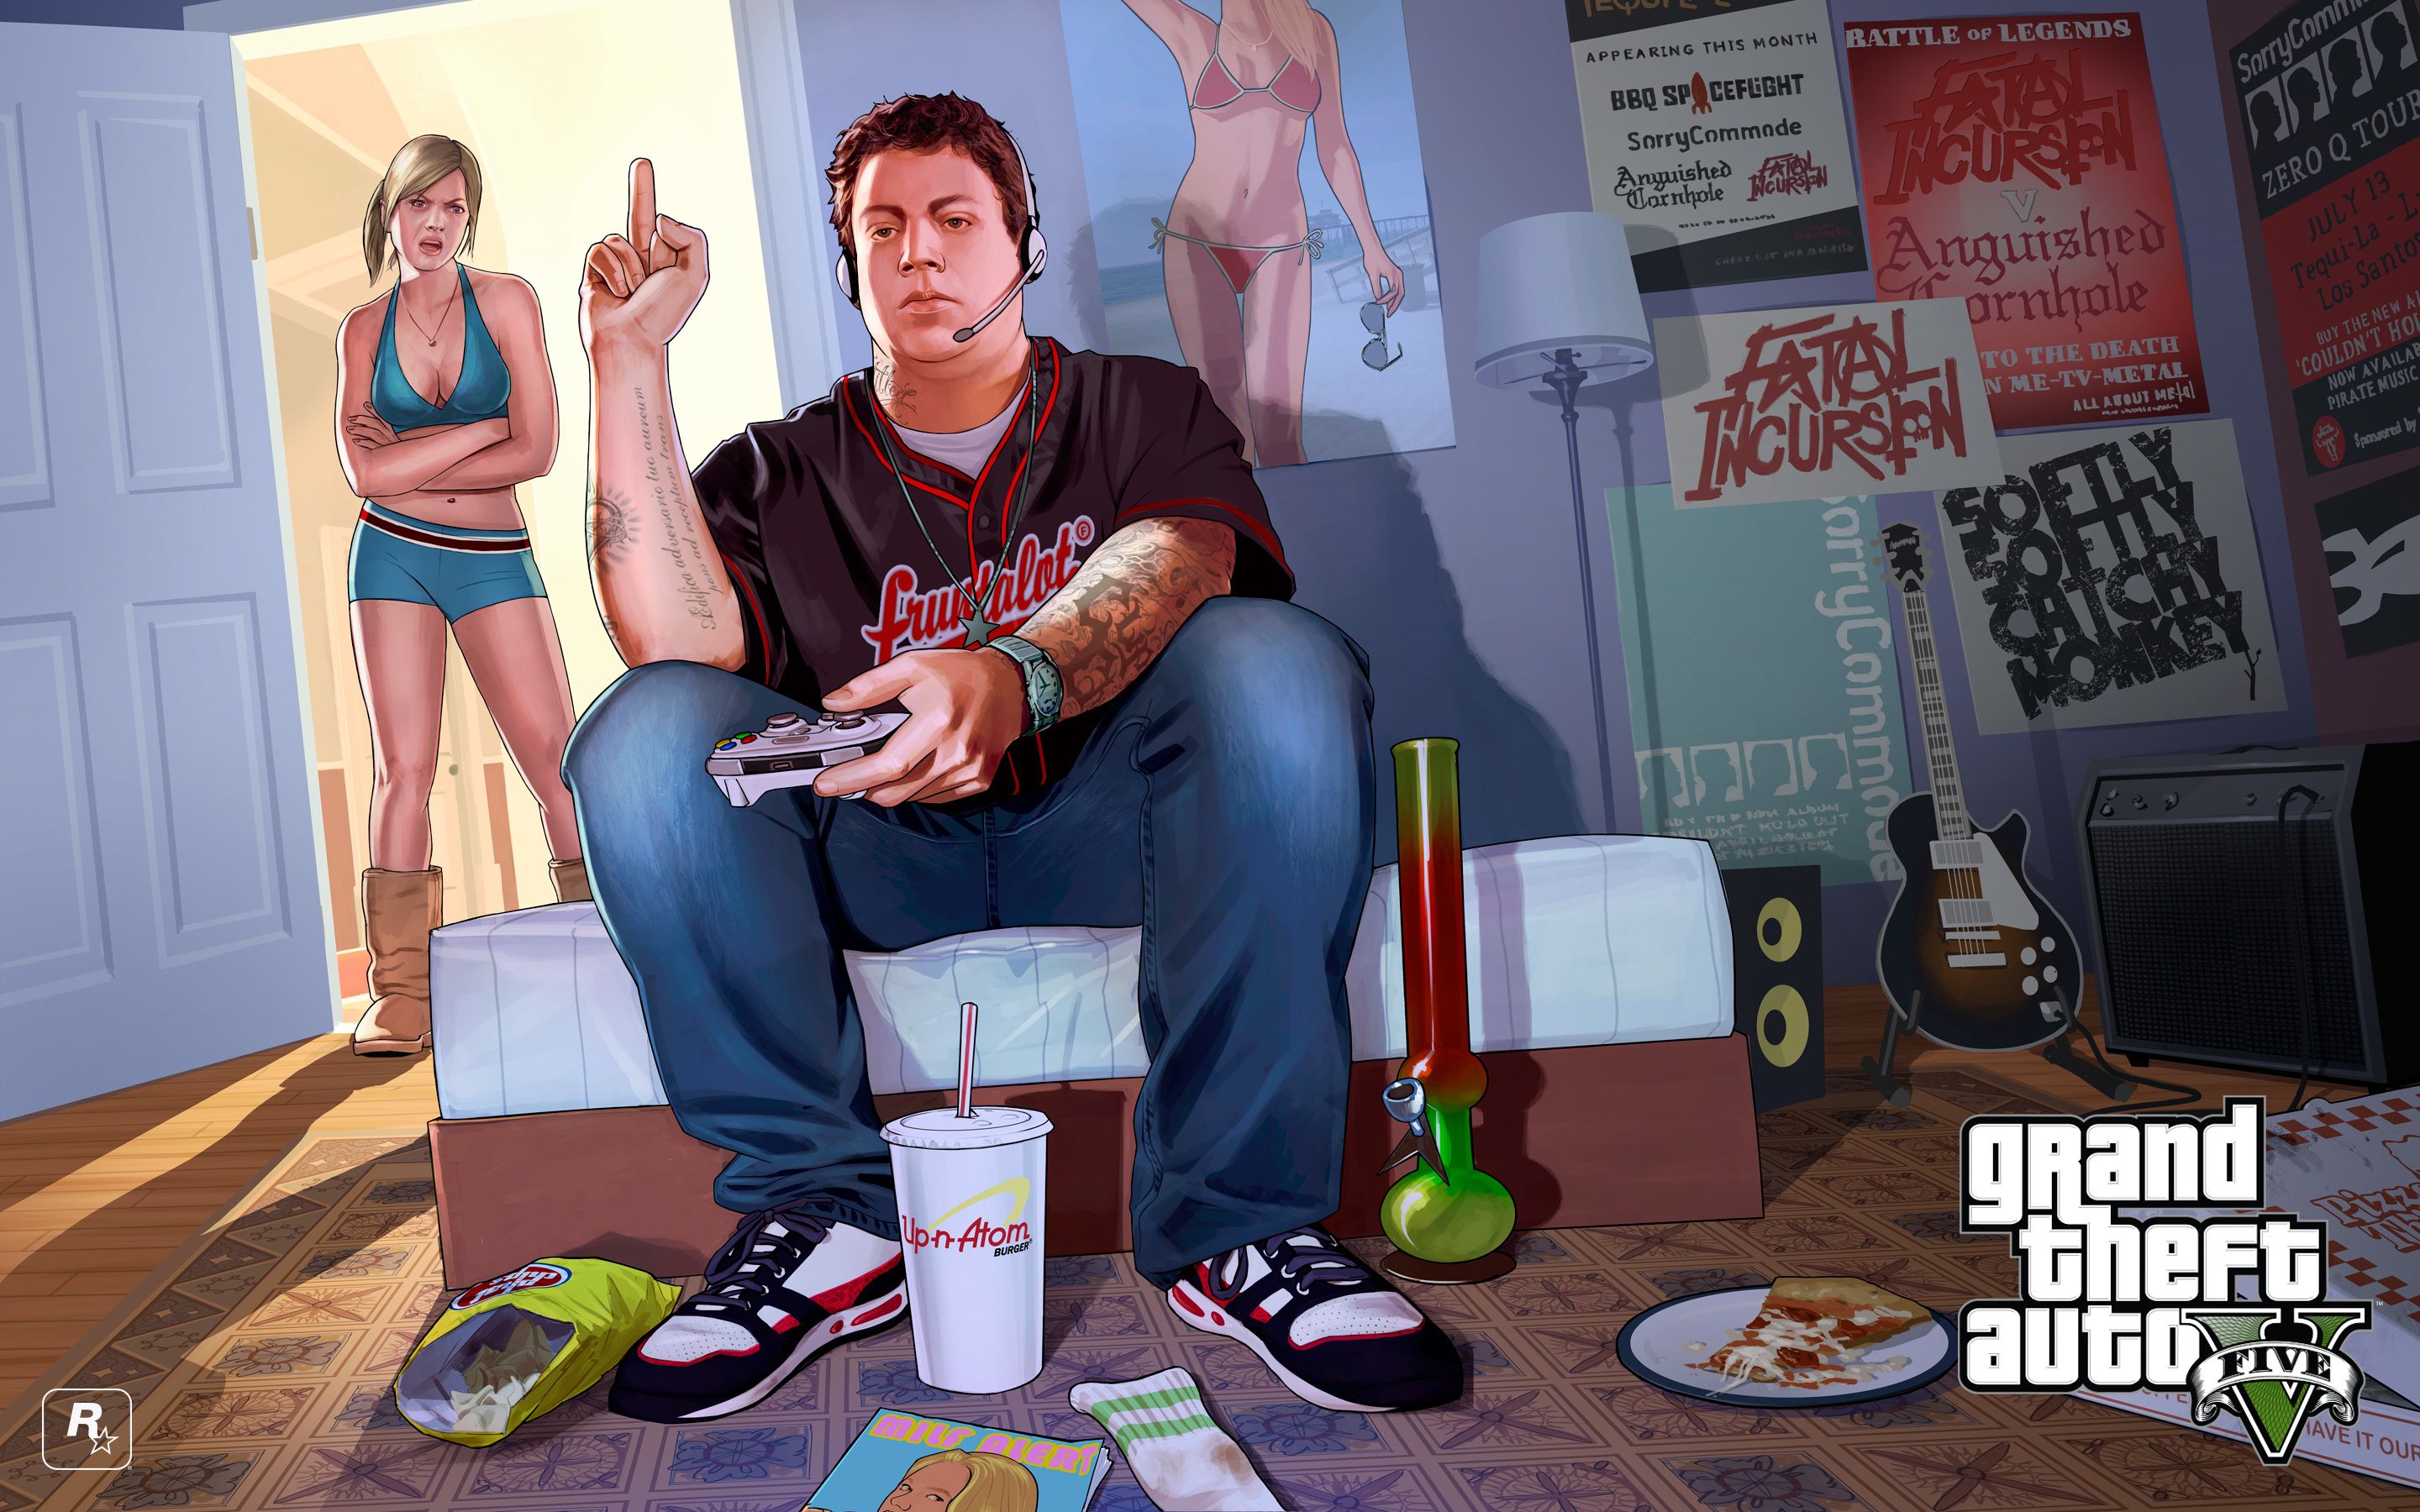 Picture GTA 5 Grand Theft Auto Man Girls Room Jeans vdeo 2880x1800